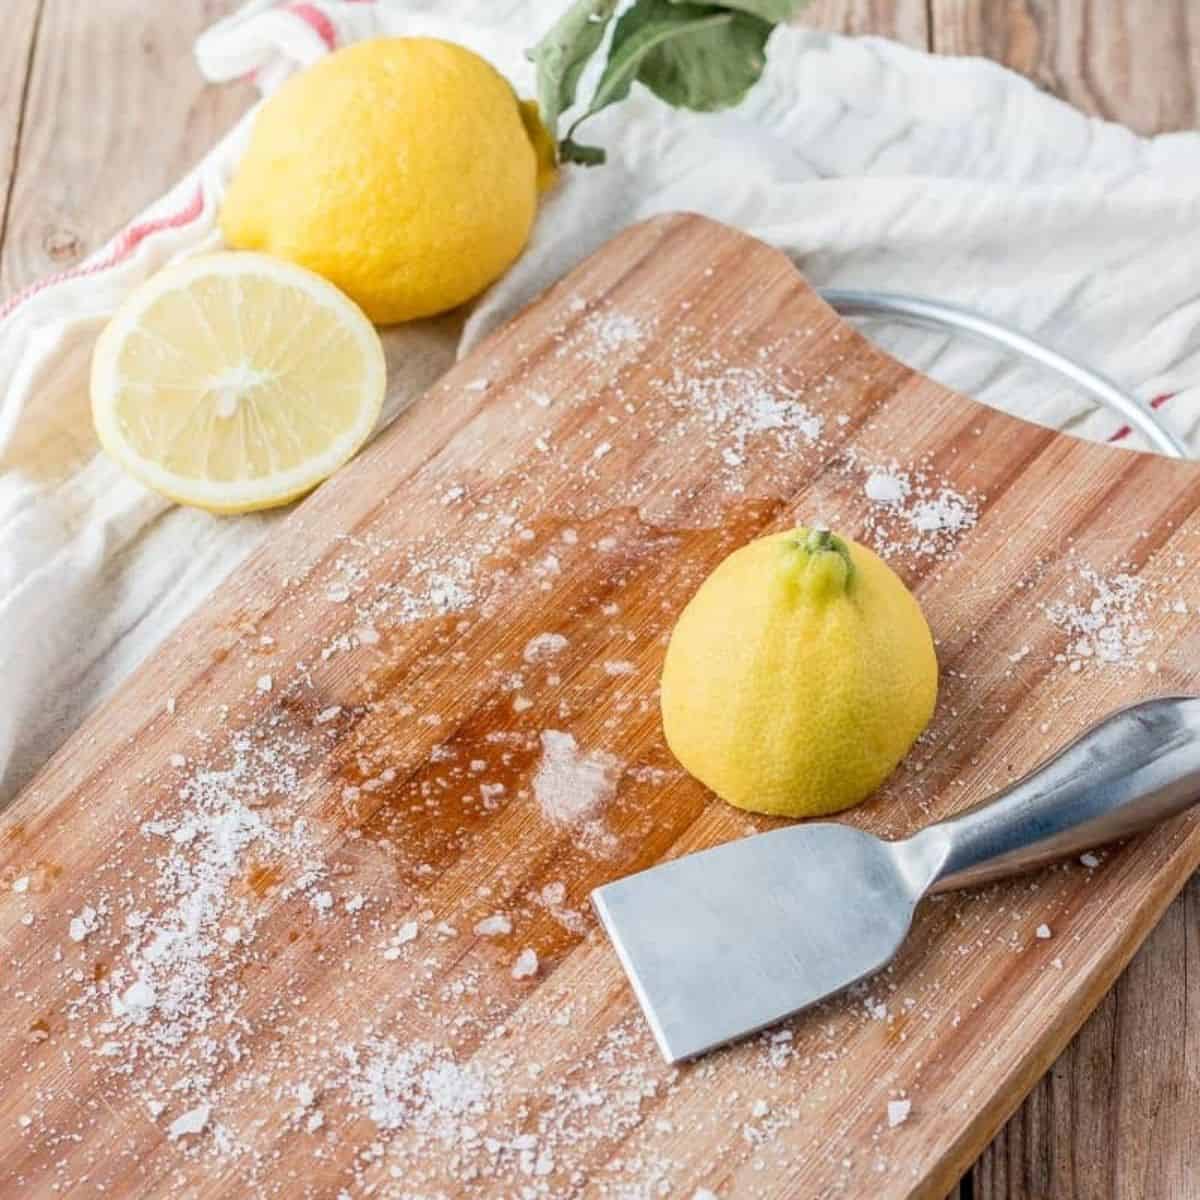 Sliced lemons and stainless steel scraper on a wooden chopping board with some baking soda scattered around it.